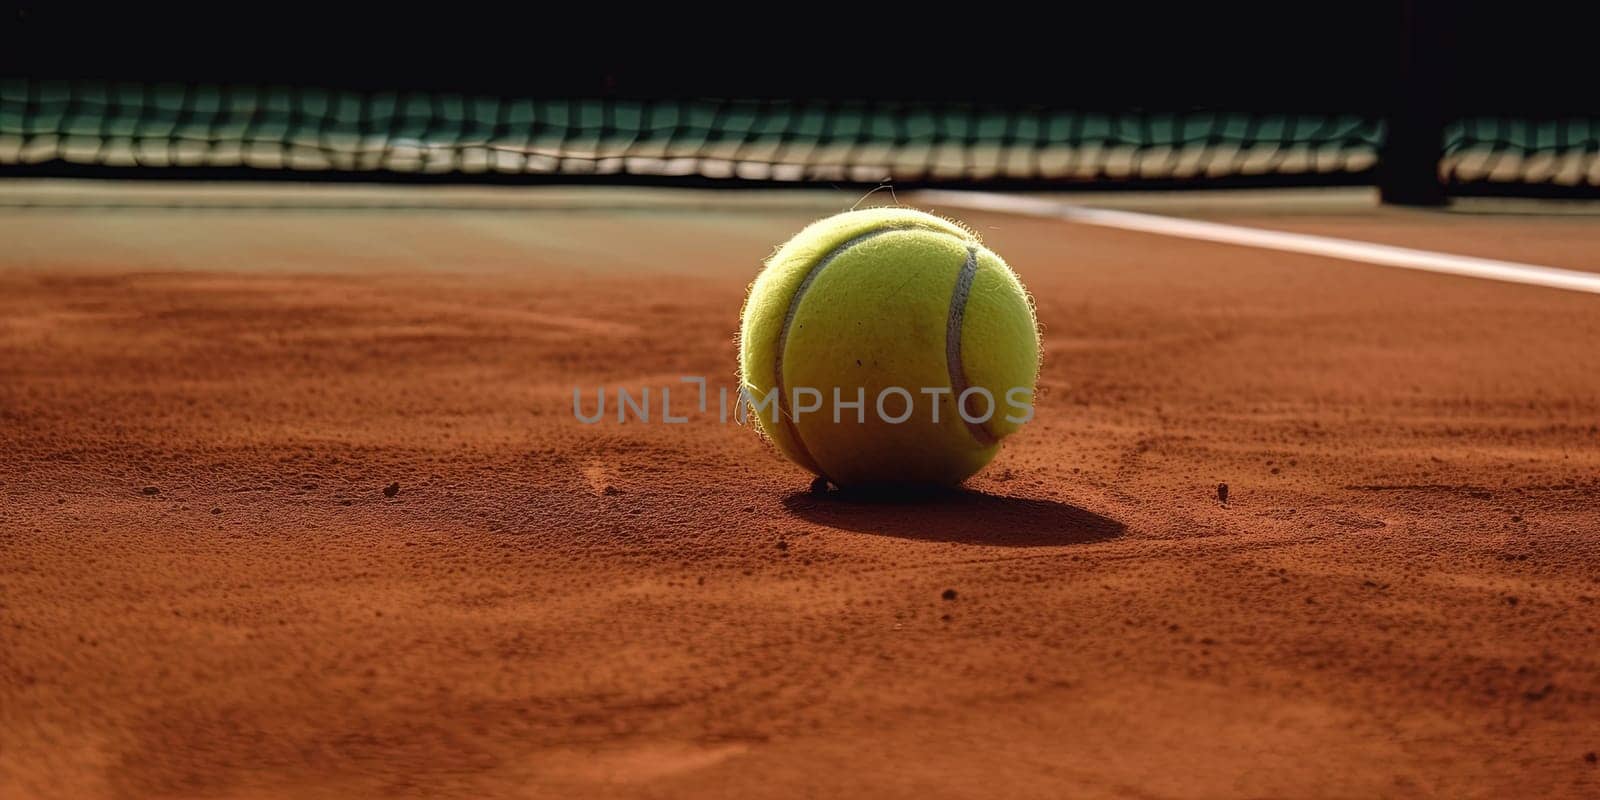 Lawn Tennis Ball On A Ground Tennis Court, Close Up View